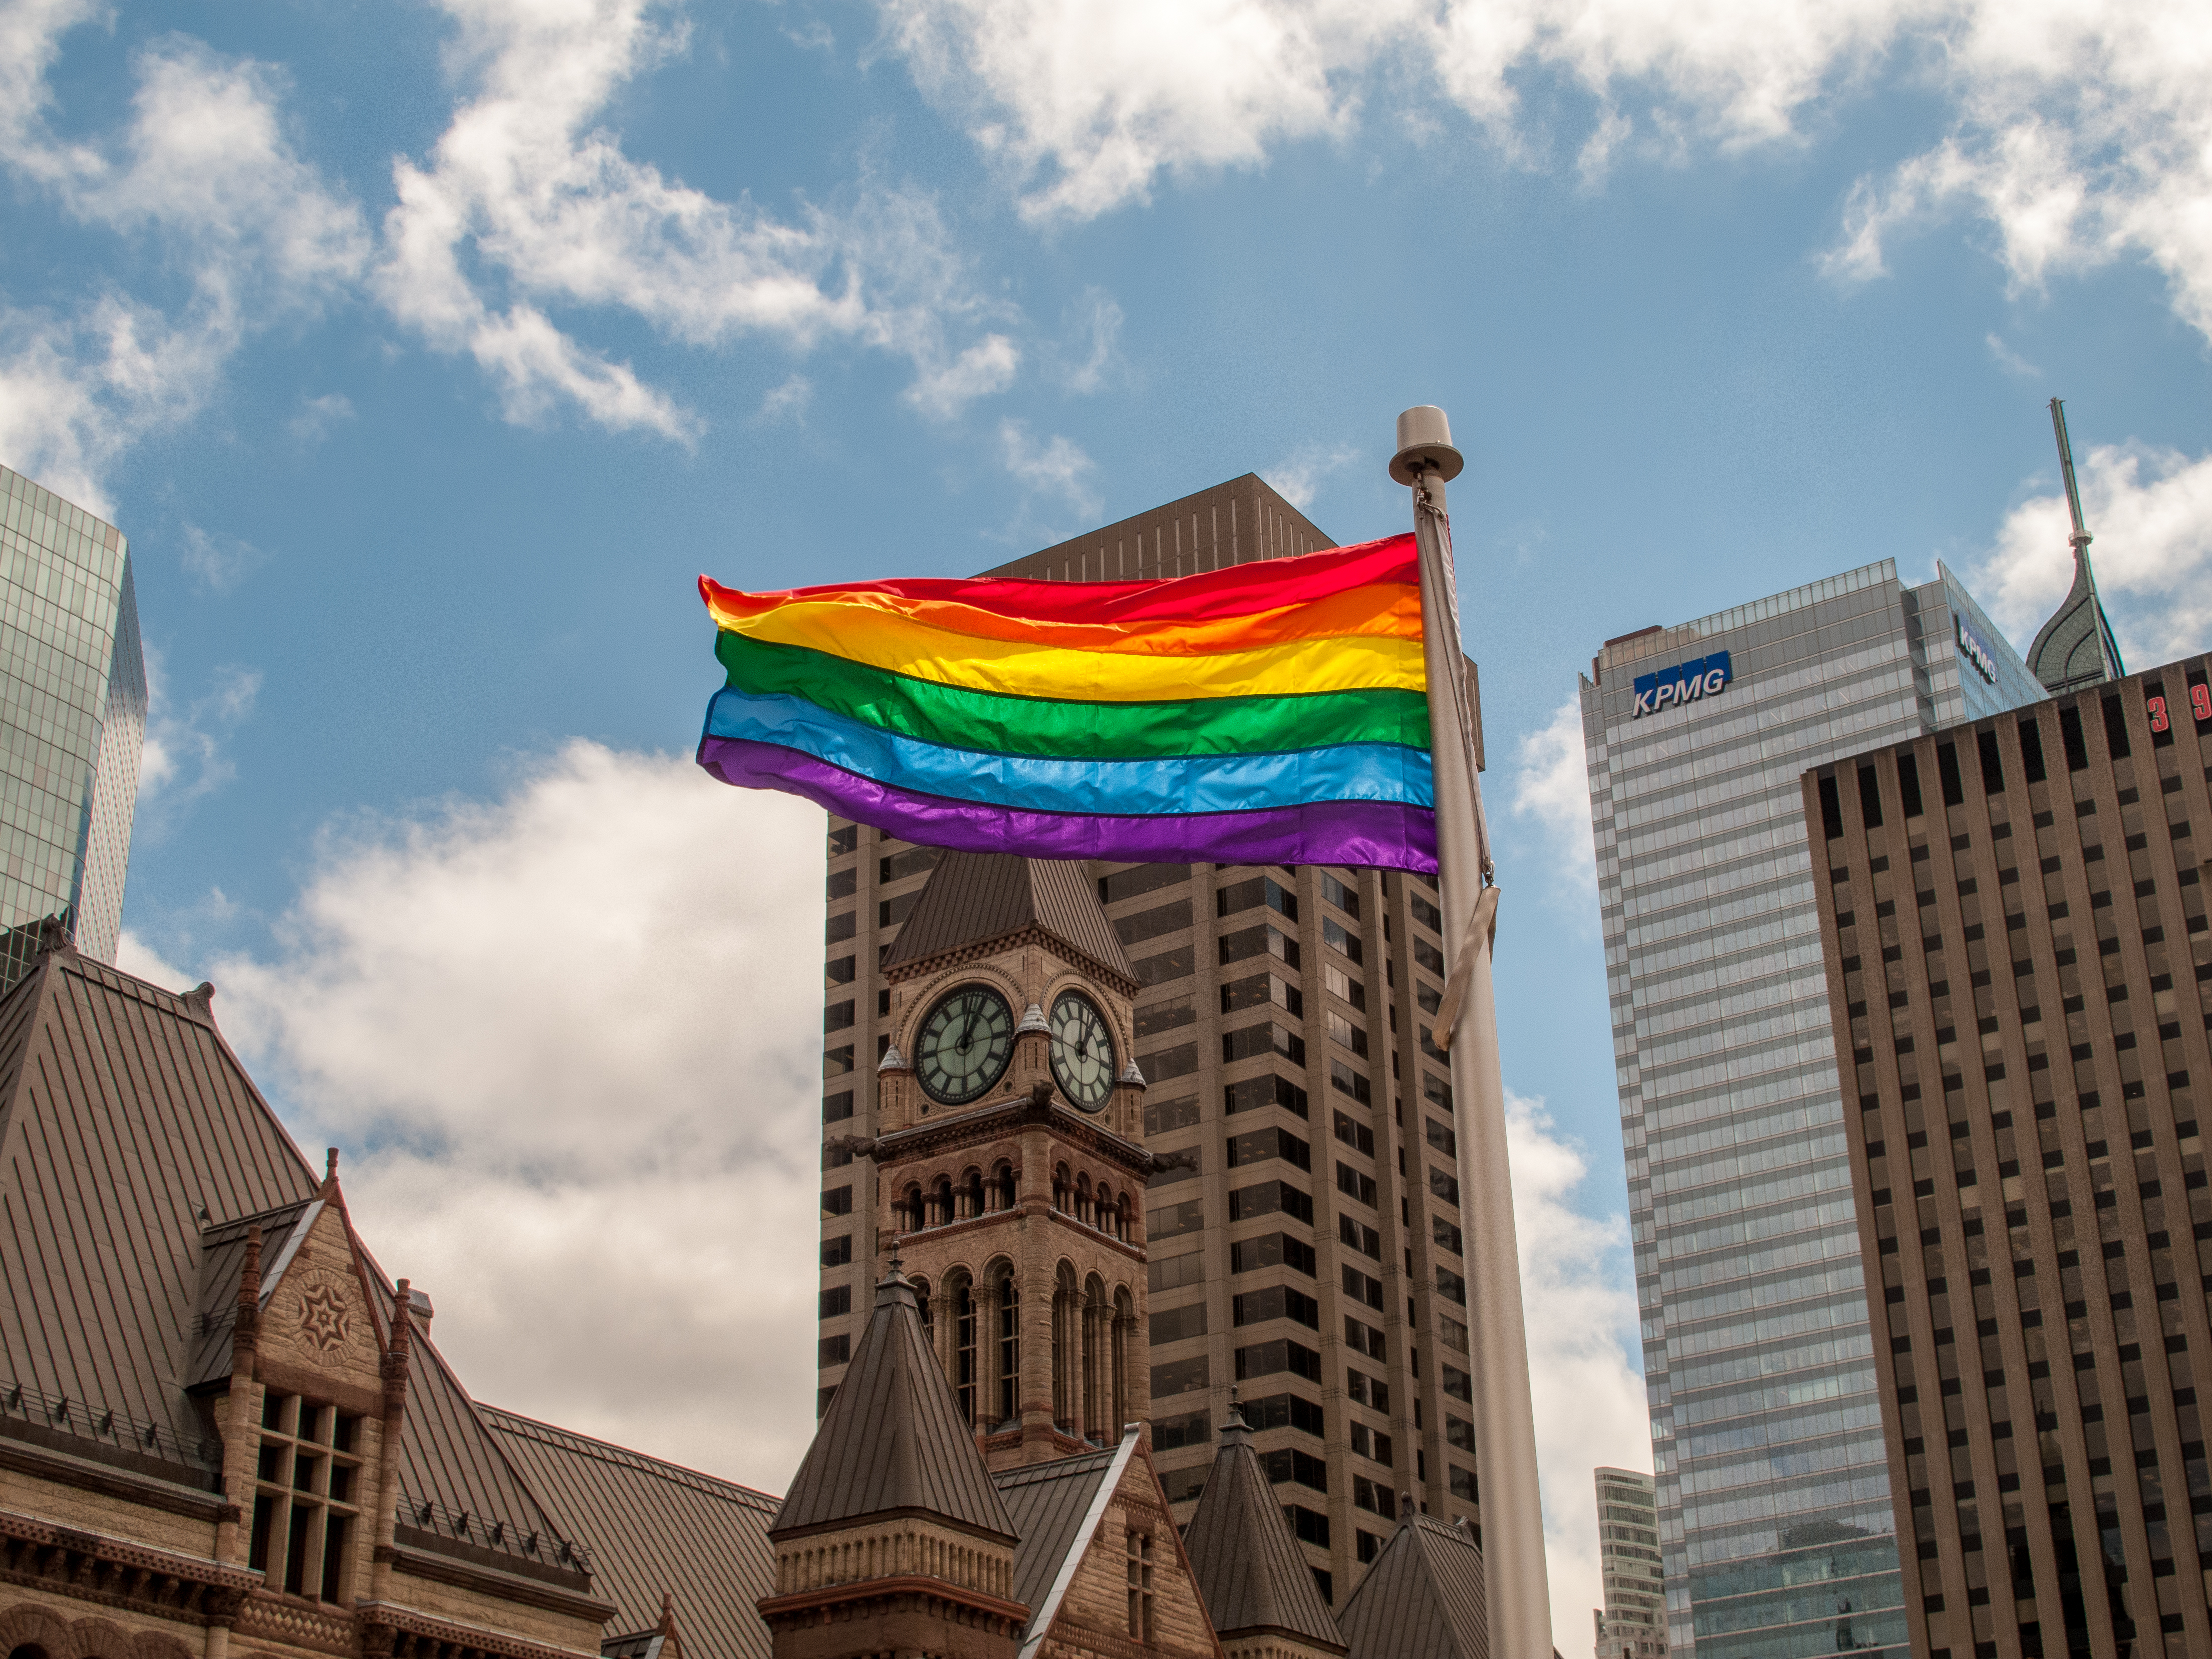 Toronto City Hall's Pride Flag Raising Ceremony and proclamation of the International Day Against Homophobia and Transphobia, 17 May 2014